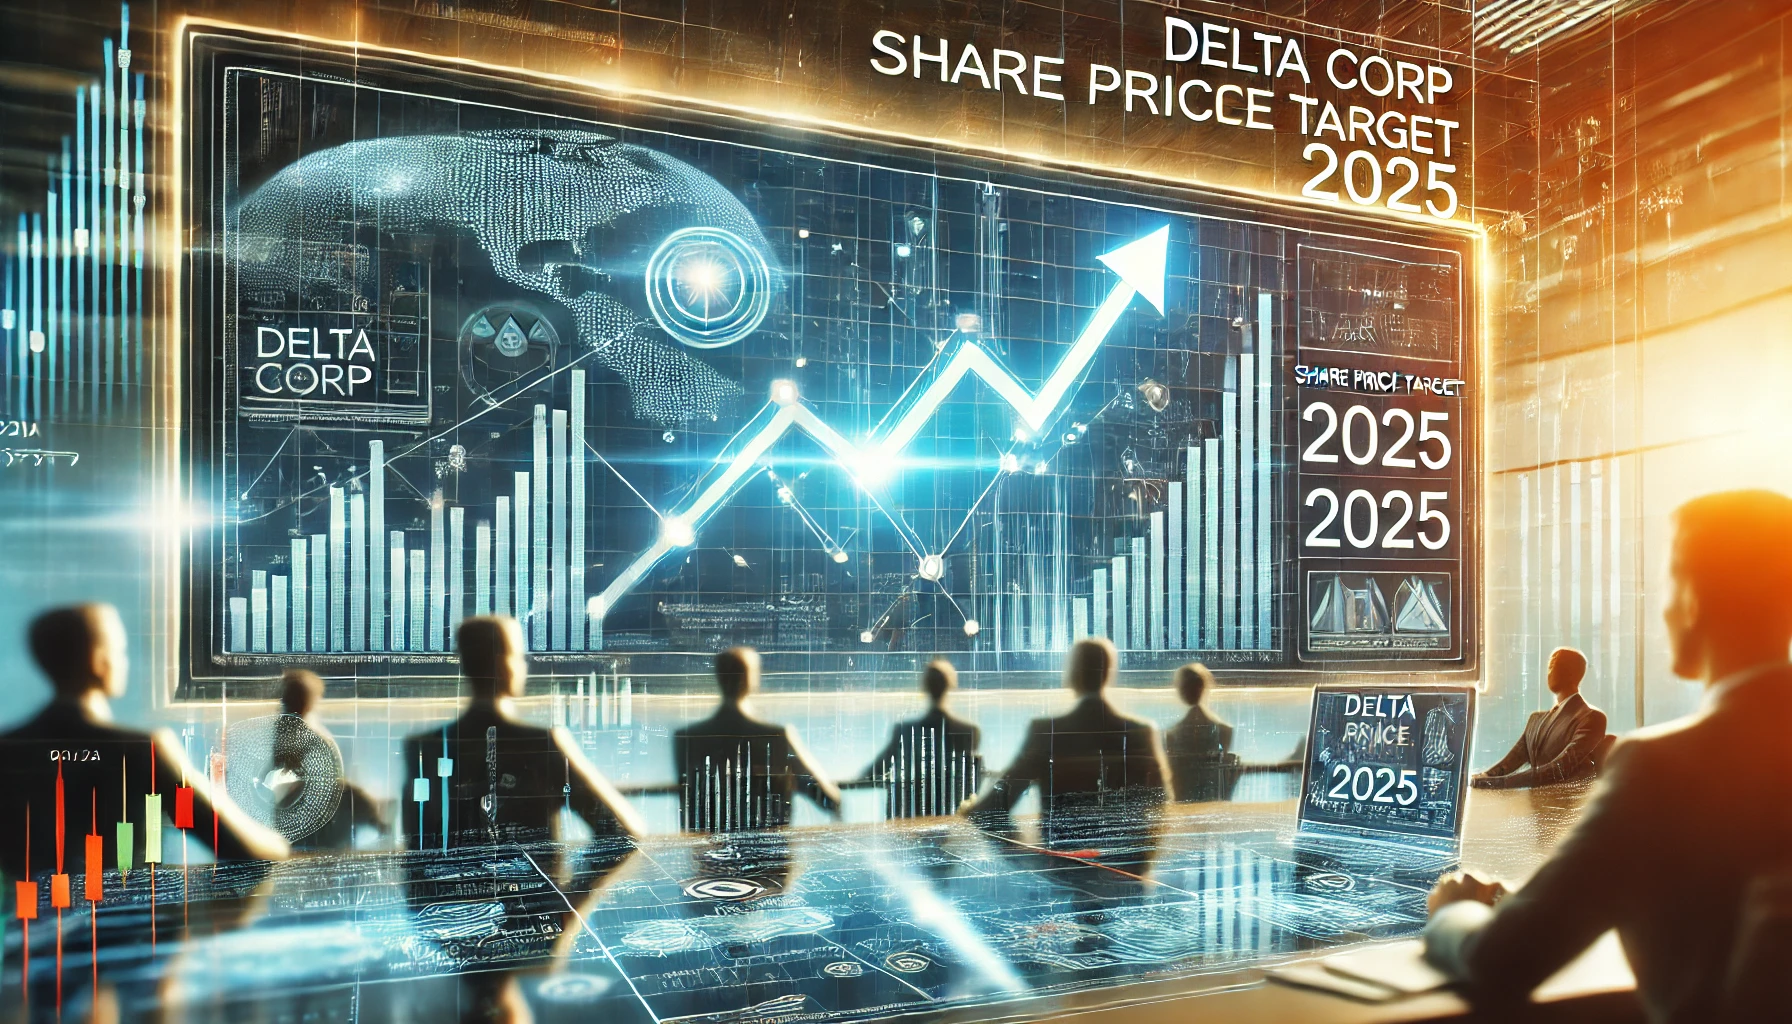 Delta Corp Share Price Target 2025